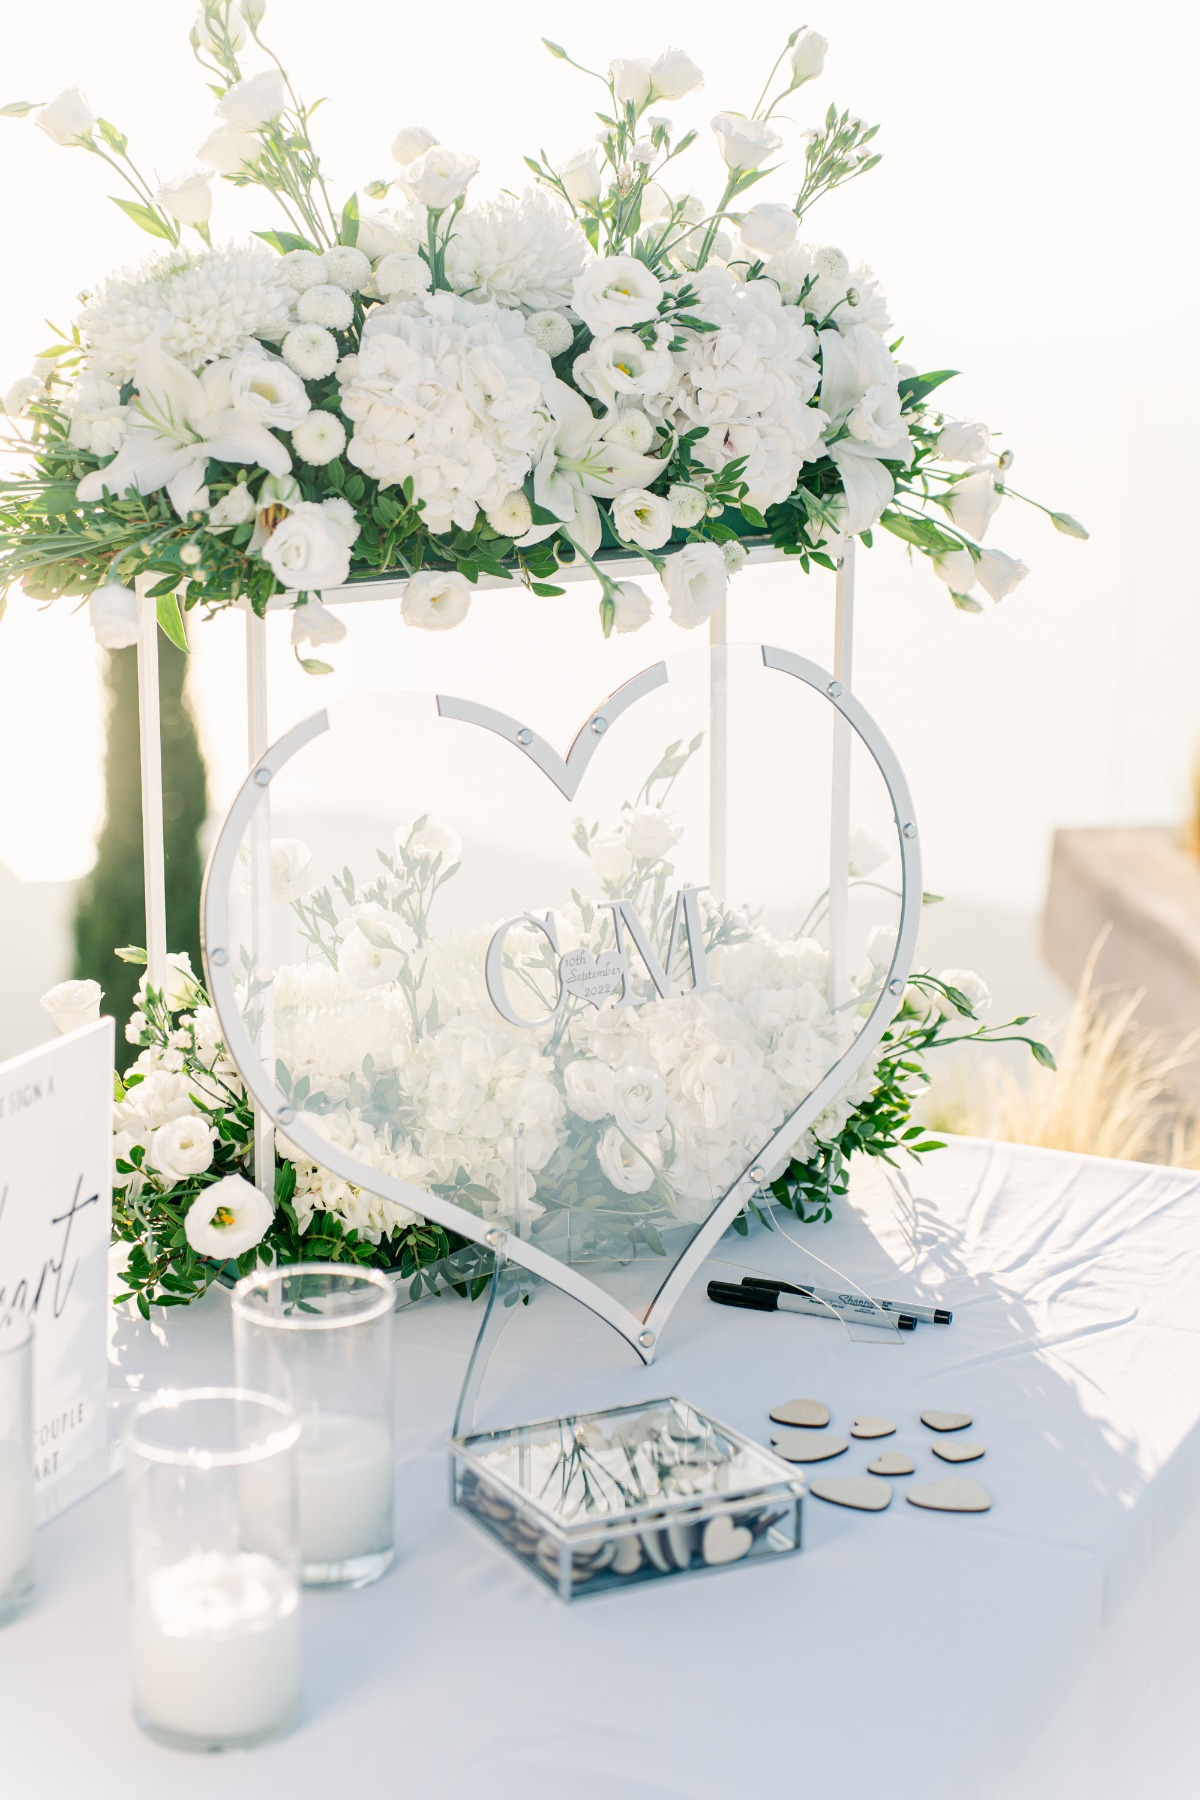 White floral heart shaped guestbook" with wooden hearts to sign